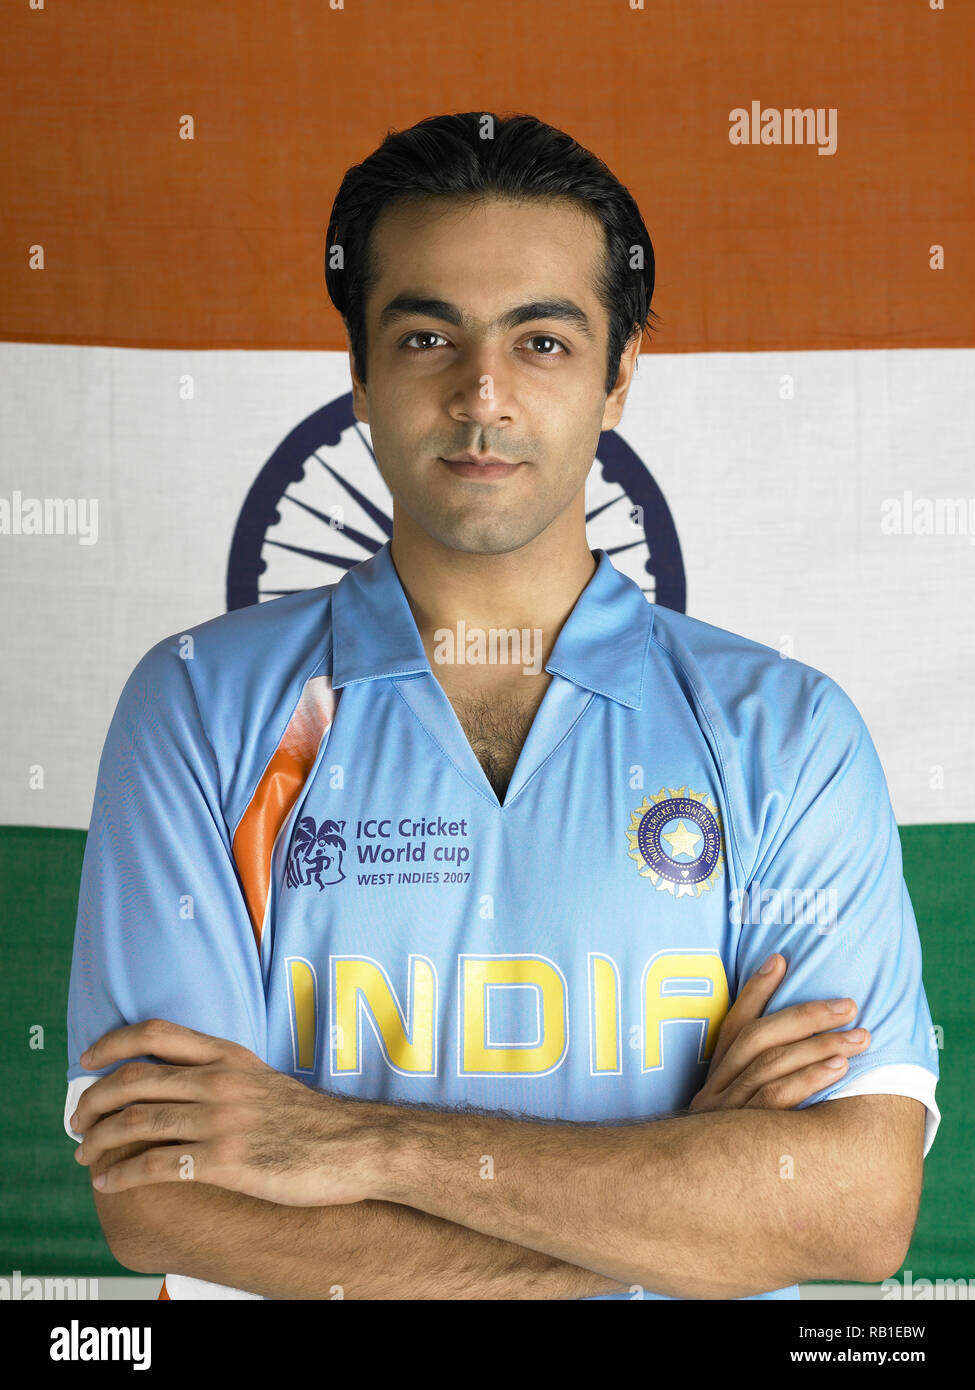 PORTRAIT OF A CRICKET PLAYER WITH THE INDIAN NATIONAL FLAG IN THE BACKGROUND  Stock Photo - Alamy